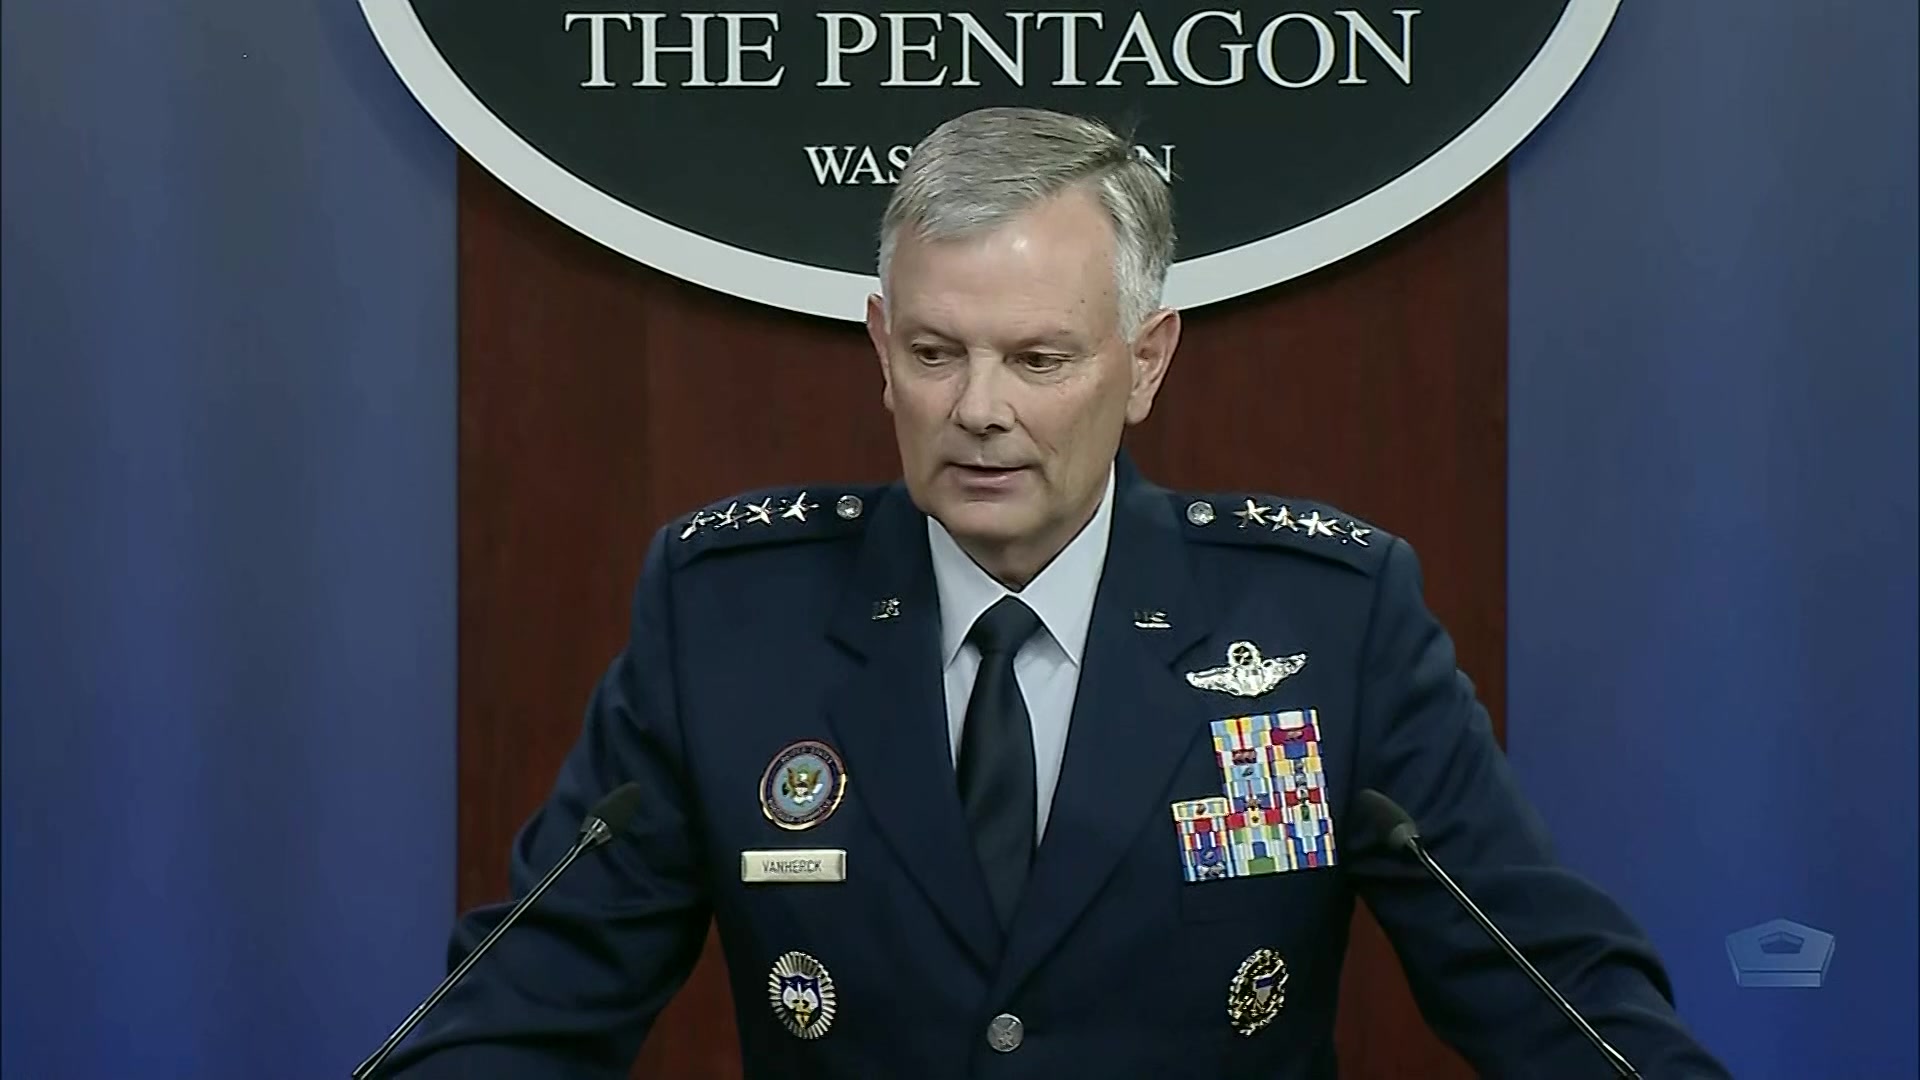 Air Force Gen. Glen D. VanHerck, commander of U.S. Northern Command, discusses how Northcom and North American Aerospace Defense Command, in collaboration with the combatant commands, completed the third in a series of global information dominance experiments during a press briefing at the Pentagon.
